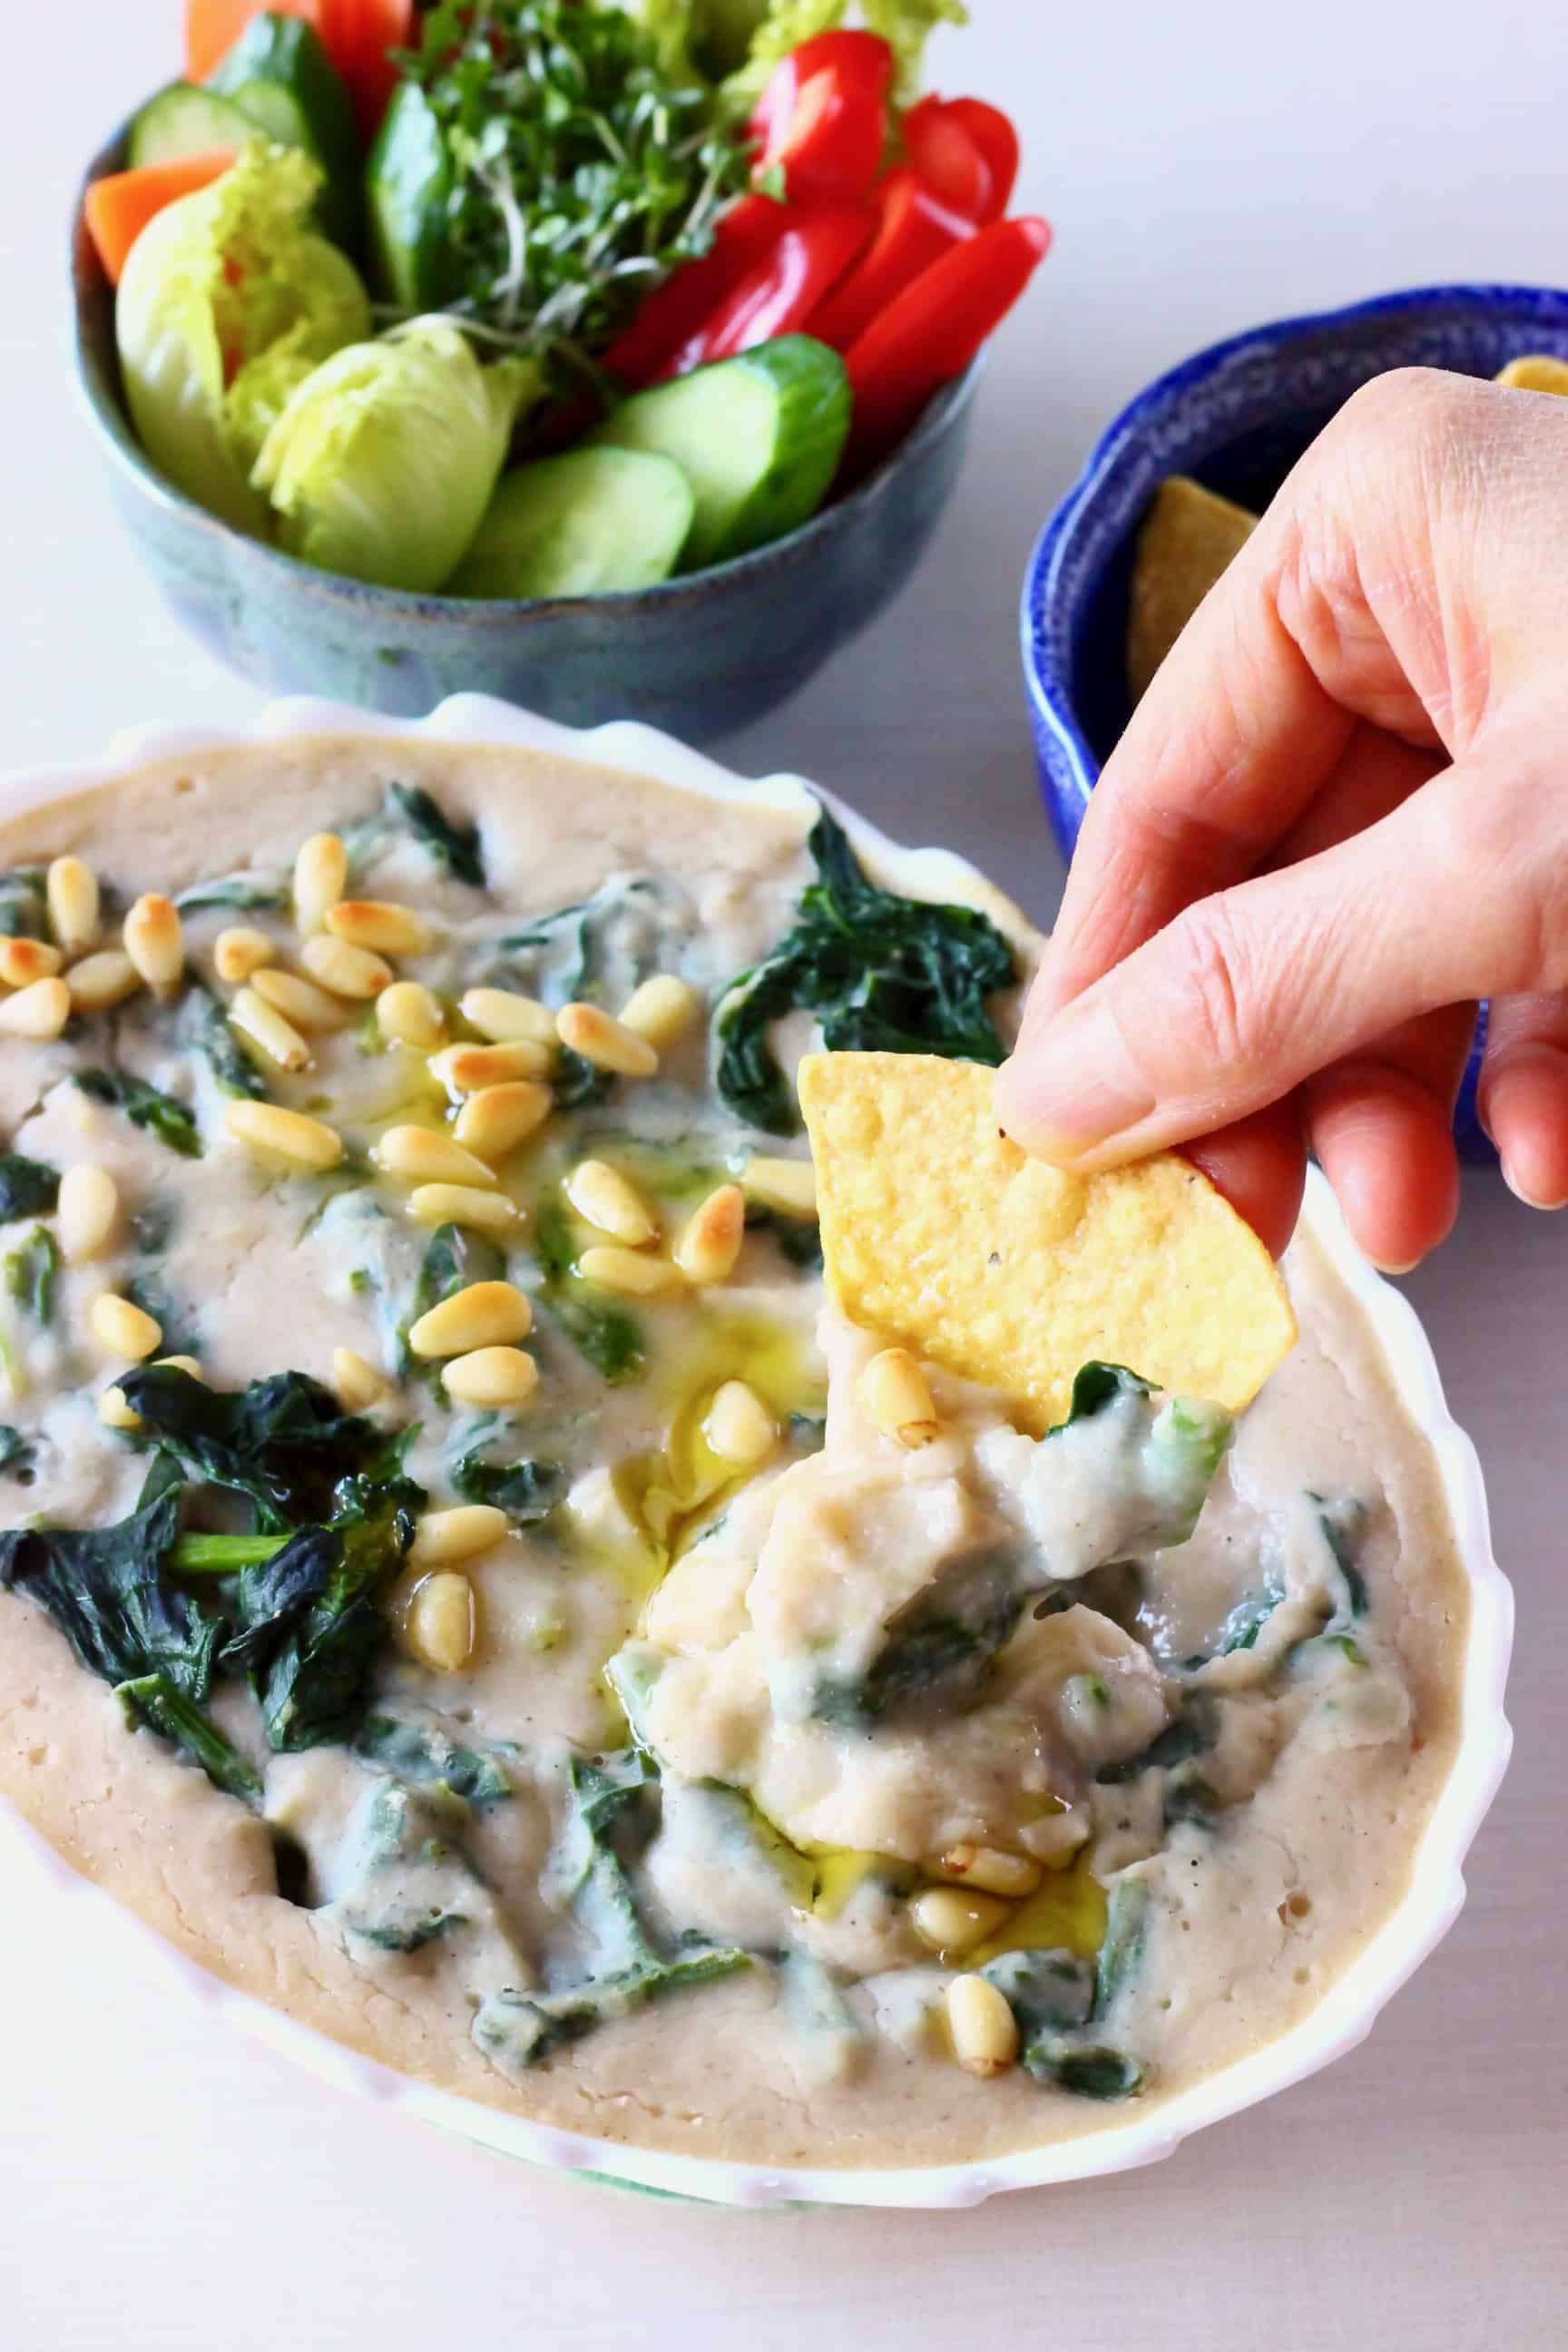 An oval dish filled with a white dip with chopped artichokes and spinach topped with pine nuts with a hand dipping a tortilla chip into it